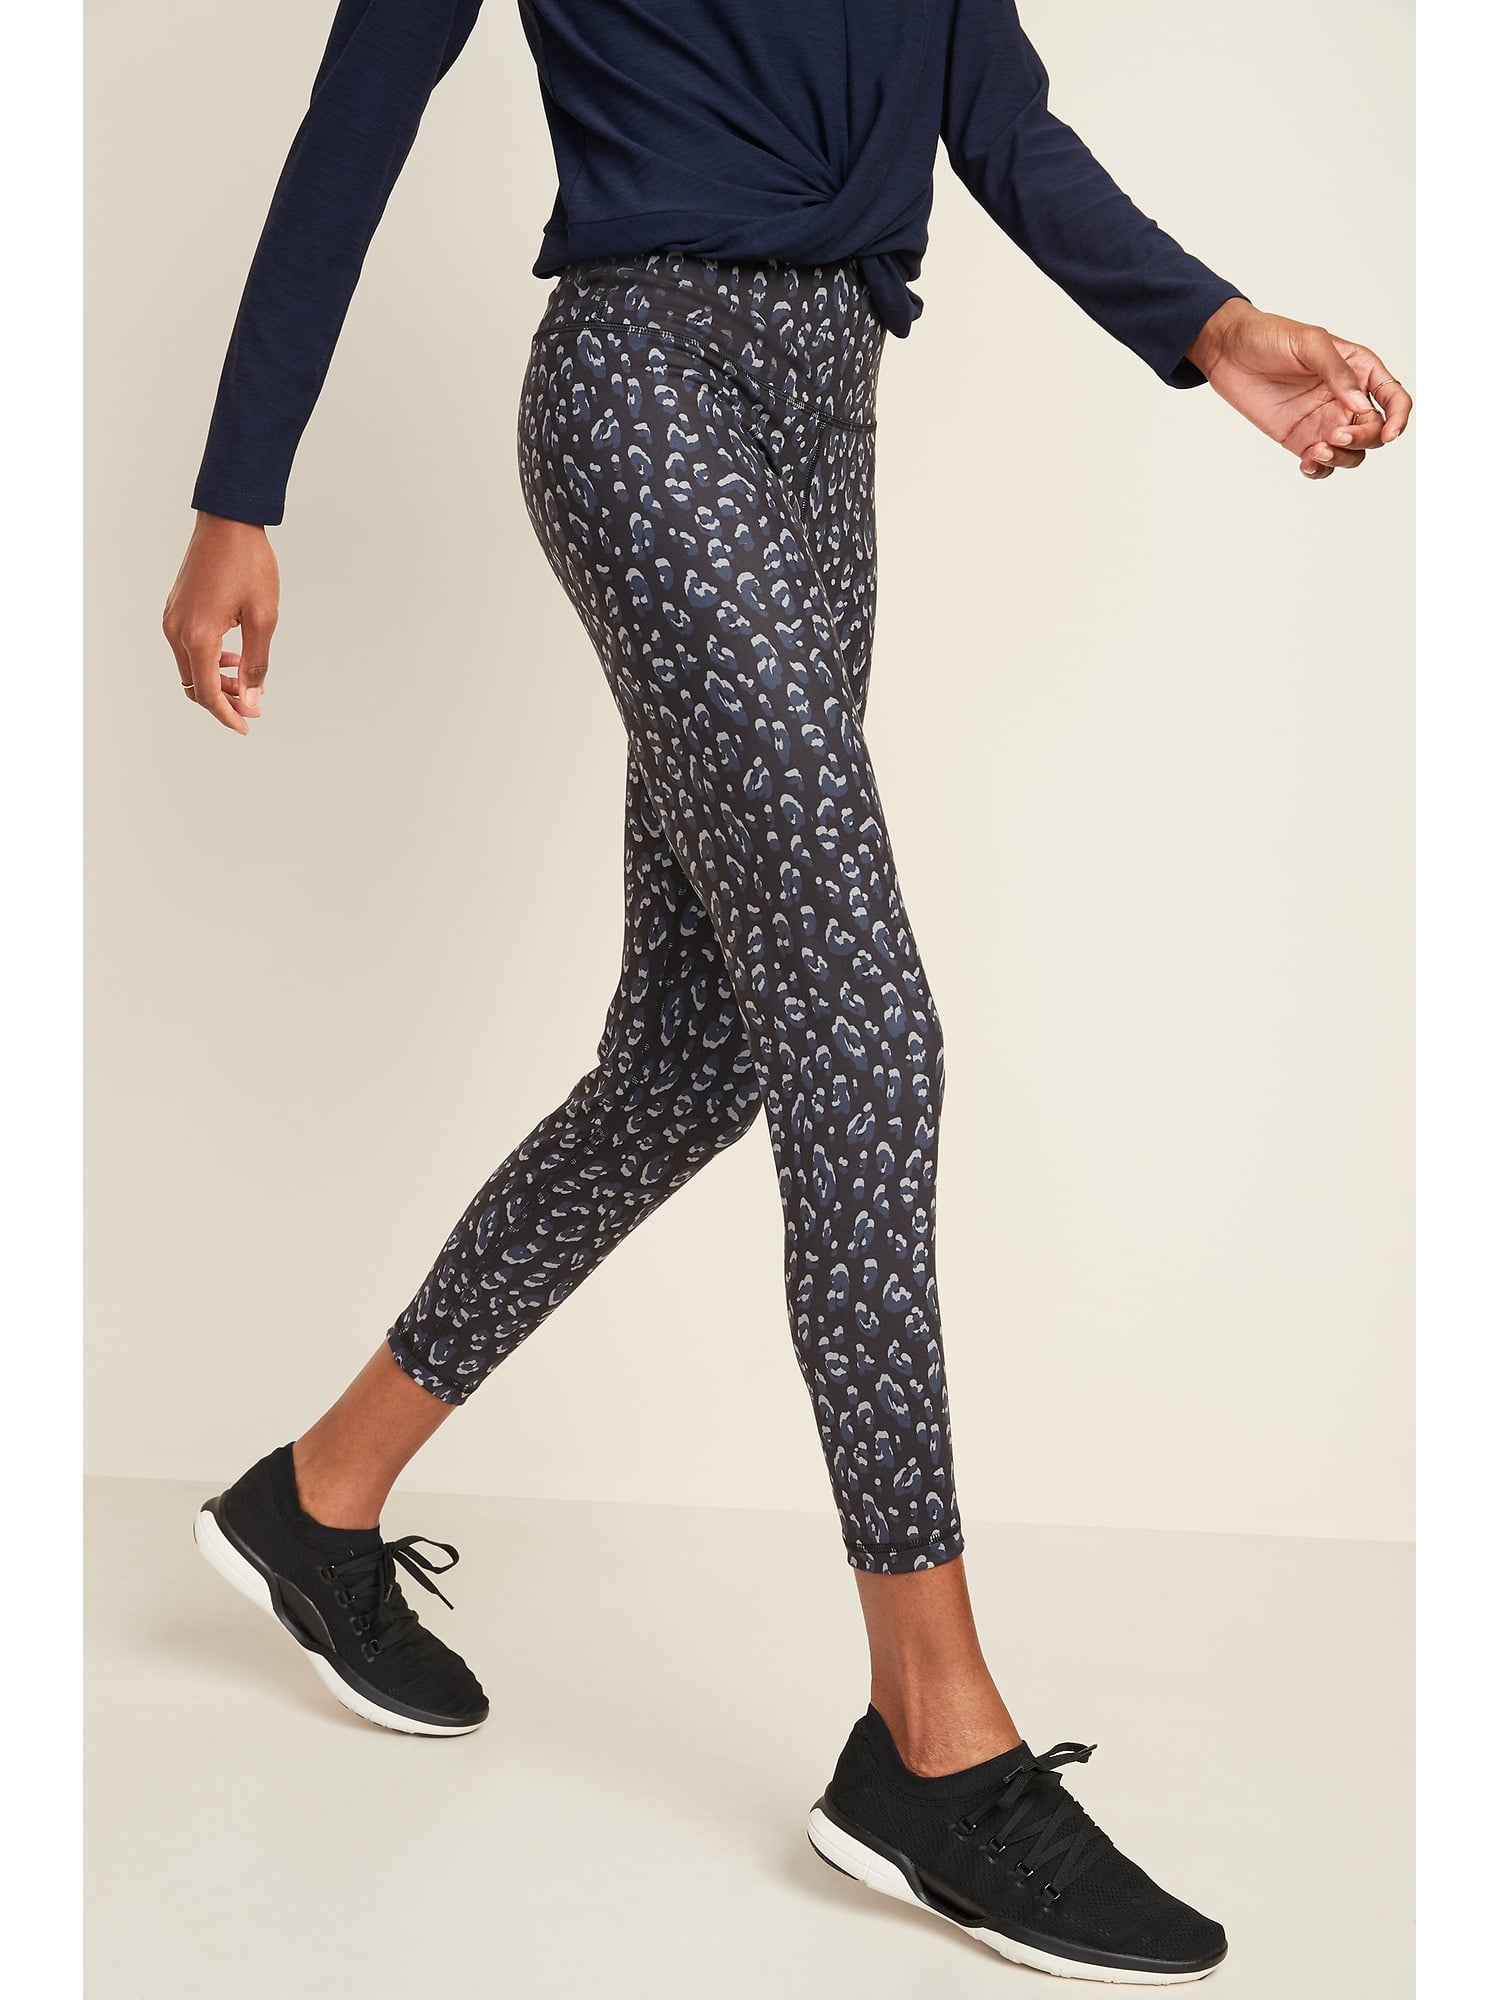 The Only Pair Of Leggings I'll Wear When I'm Bloated